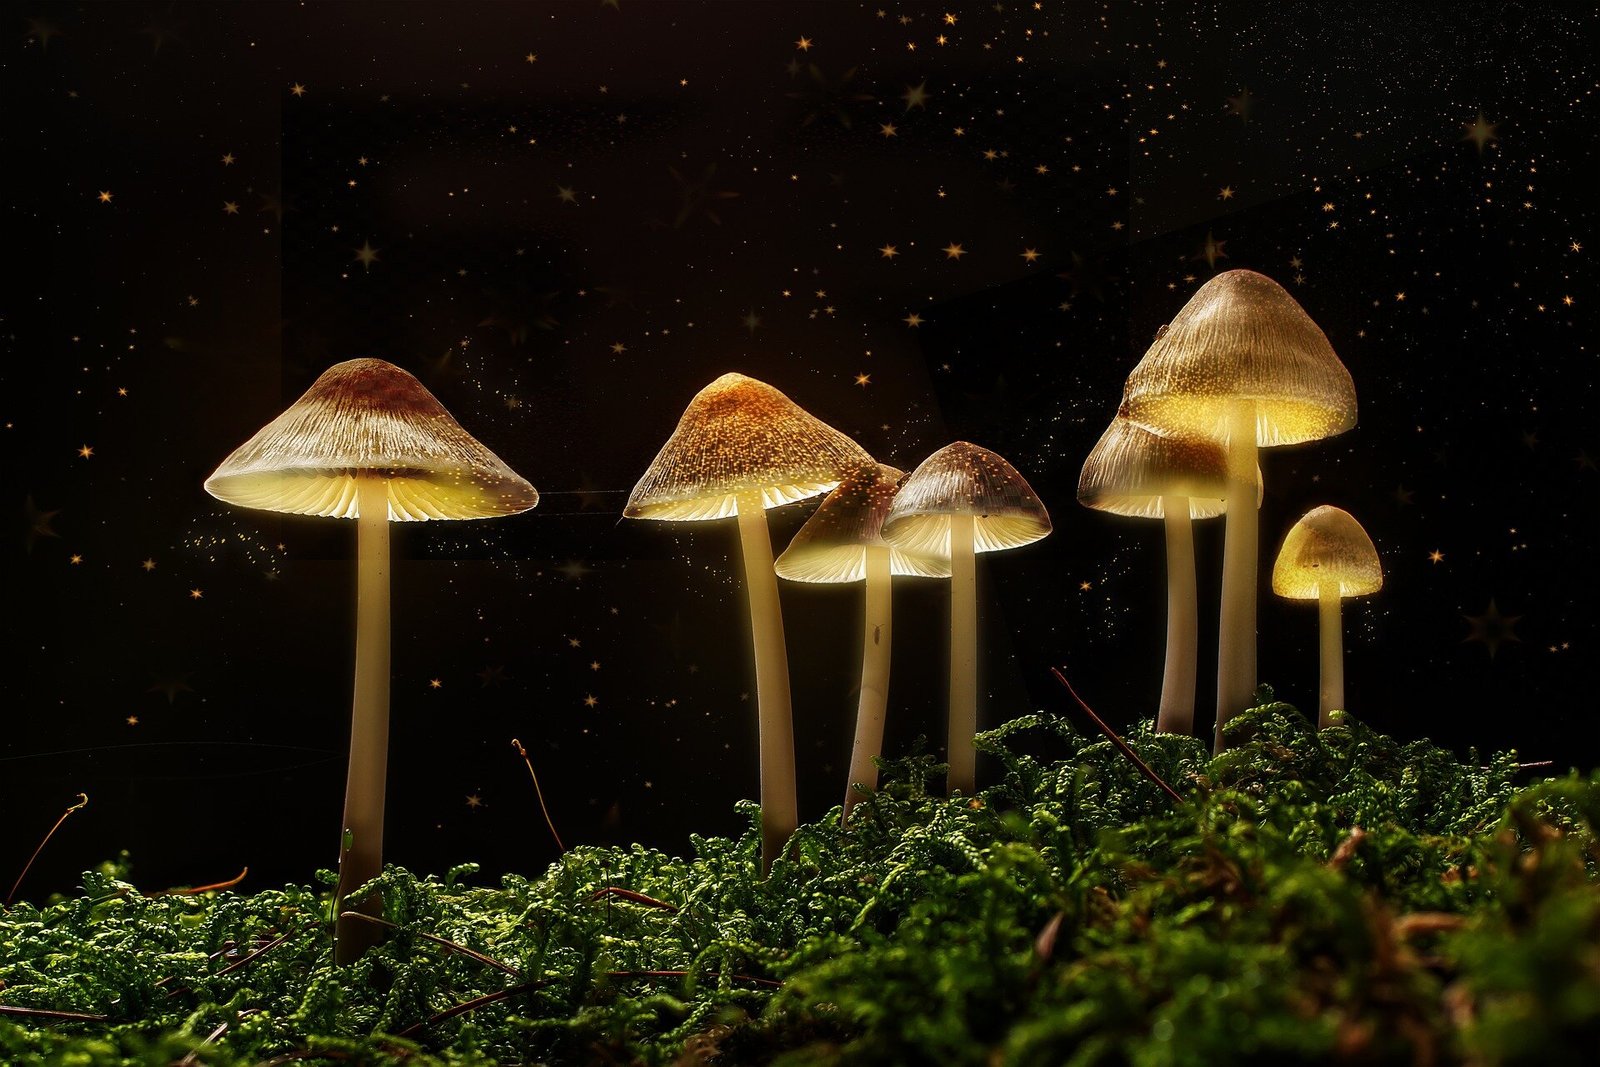 Magic mushrooms may one day treat anorexia, but not just yet